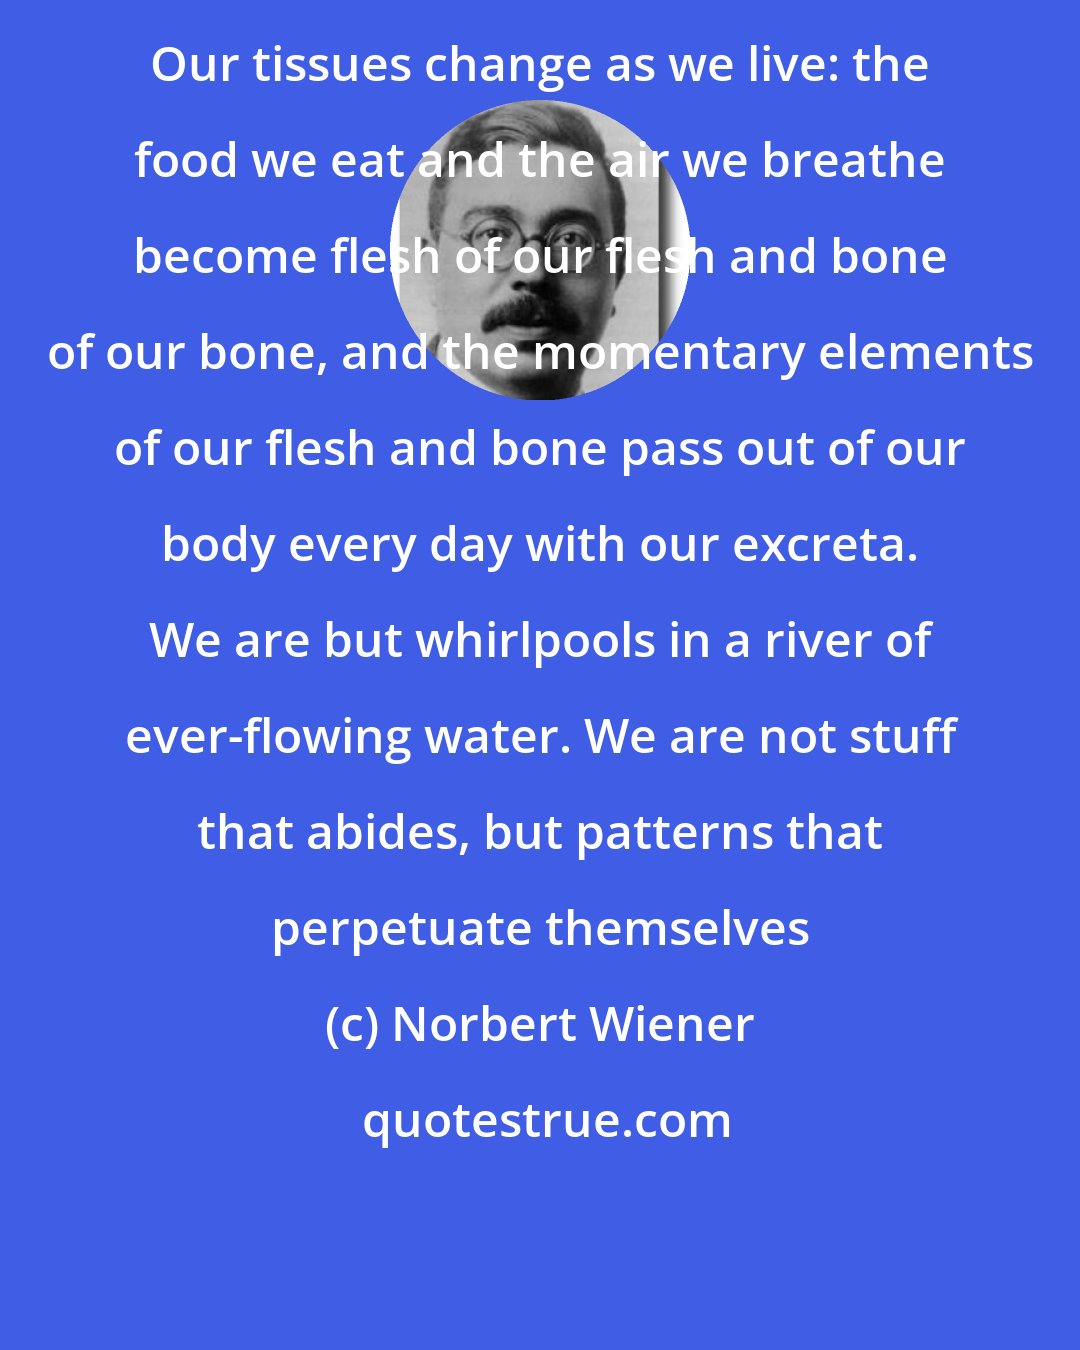 Norbert Wiener: Our tissues change as we live: the food we eat and the air we breathe become flesh of our flesh and bone of our bone, and the momentary elements of our flesh and bone pass out of our body every day with our excreta. We are but whirlpools in a river of ever-flowing water. We are not stuff that abides, but patterns that perpetuate themselves